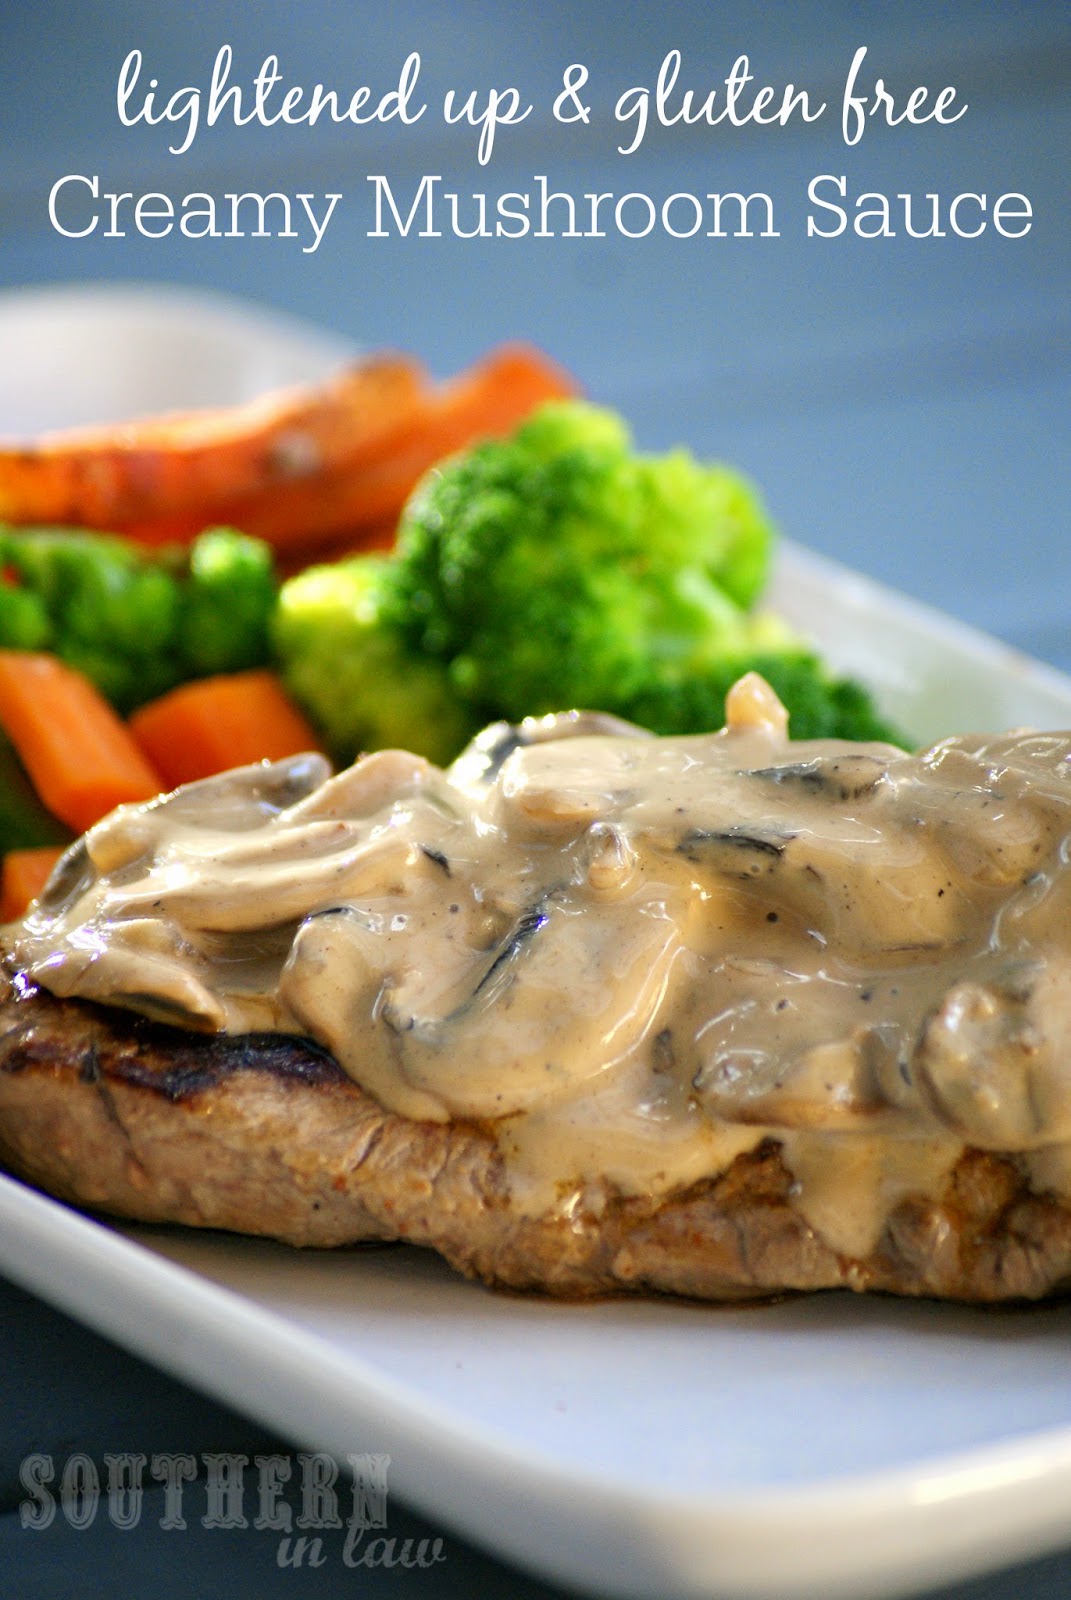 Southern In Law: Recipe: Lightened Up Creamy Mushroom Sauce for Steak or Chicken